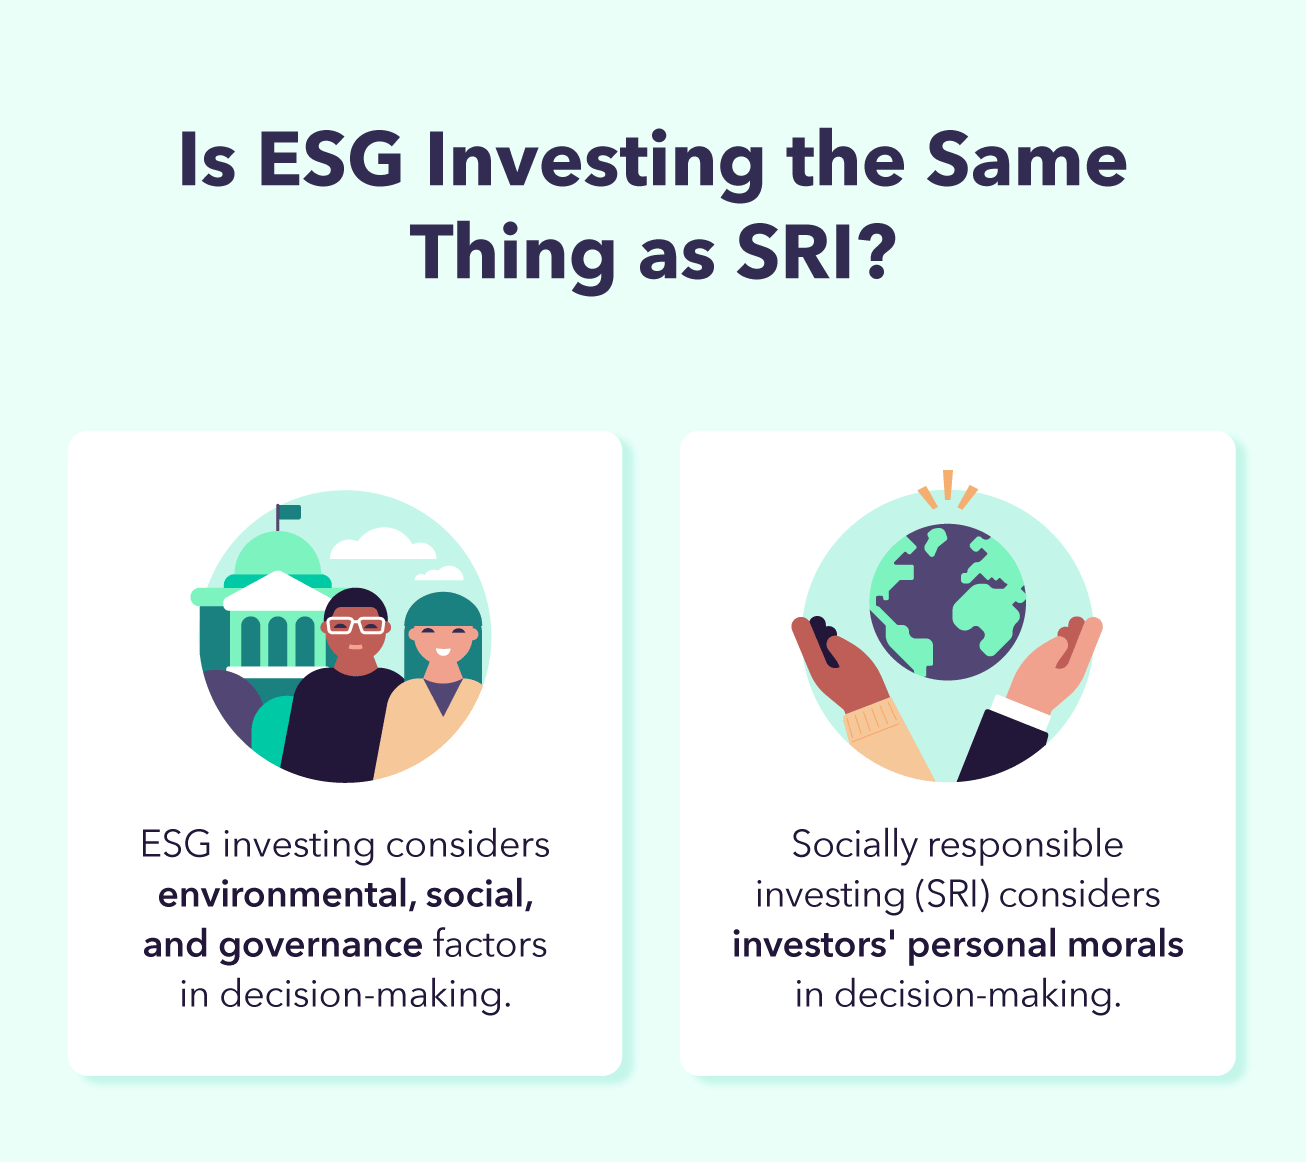 ESG investing considers environmental, social, and governance factors in decision-making. Socially responsible investing considers investors' personal morals in decision-making. 